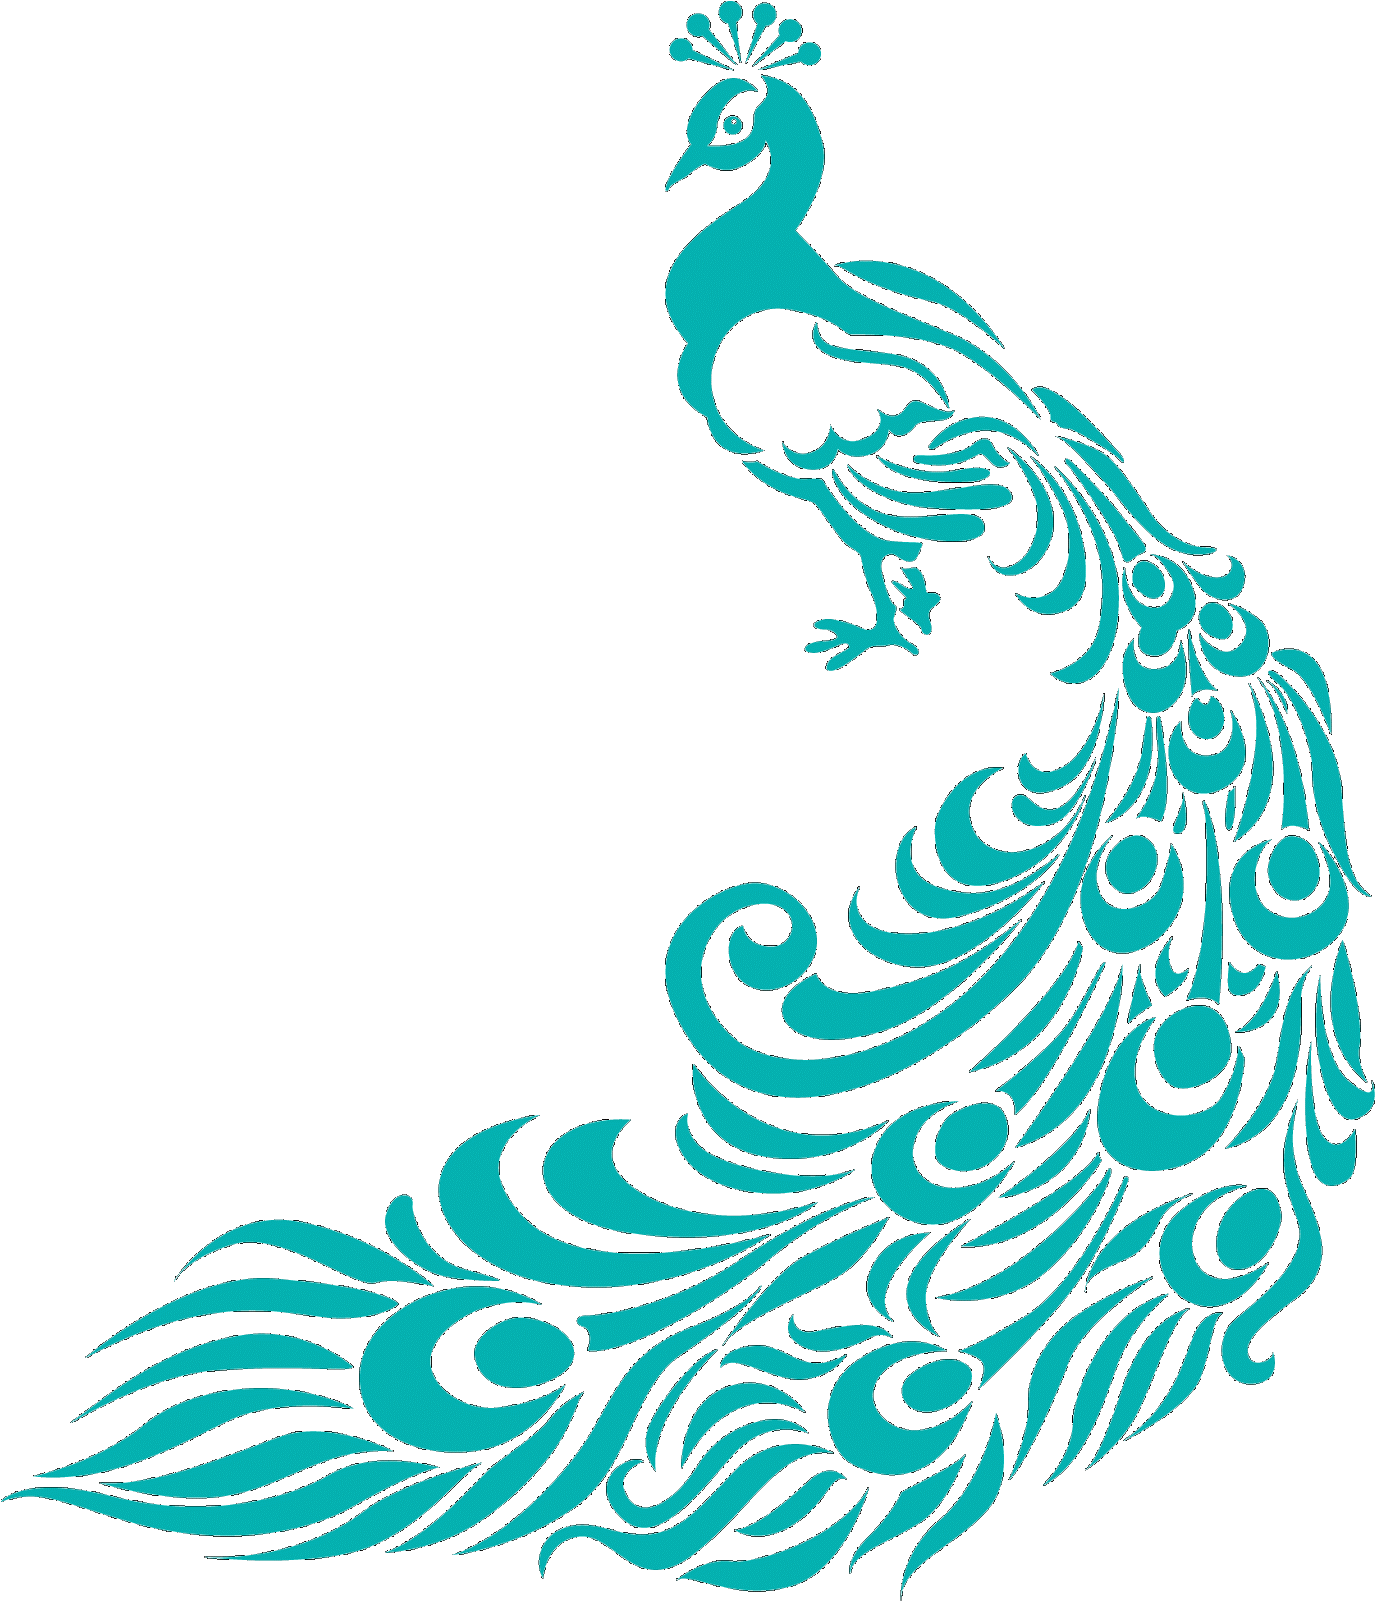 Peacock Designs For Fabric Painting - Border Design For Assignment (1383x1600)